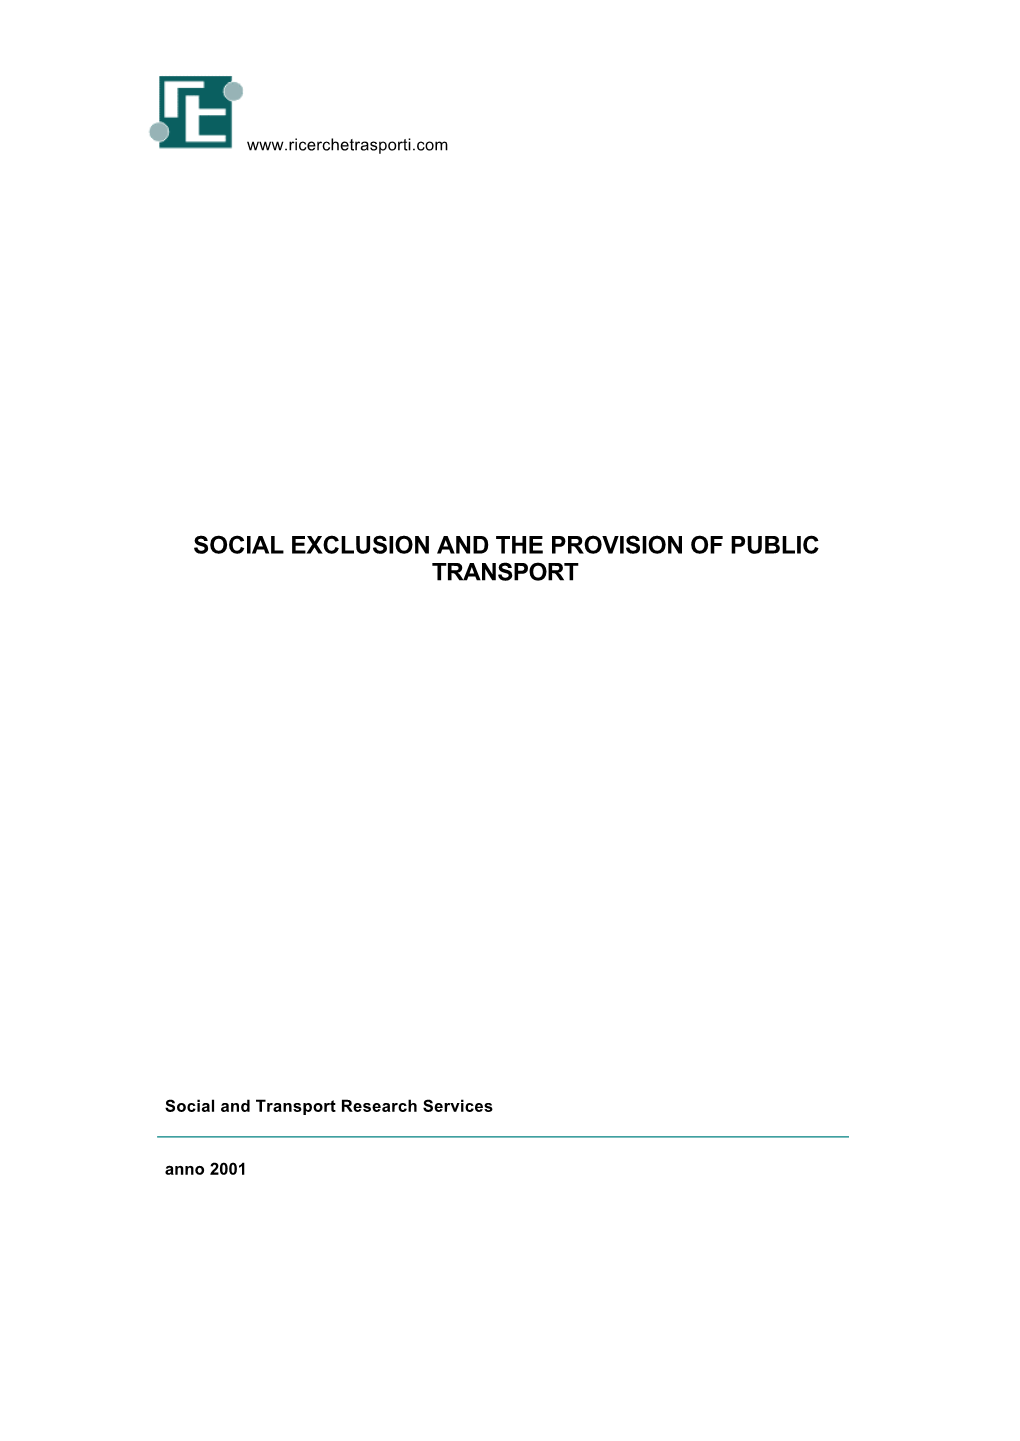 Social Exclusion and the Provision of Public Transport